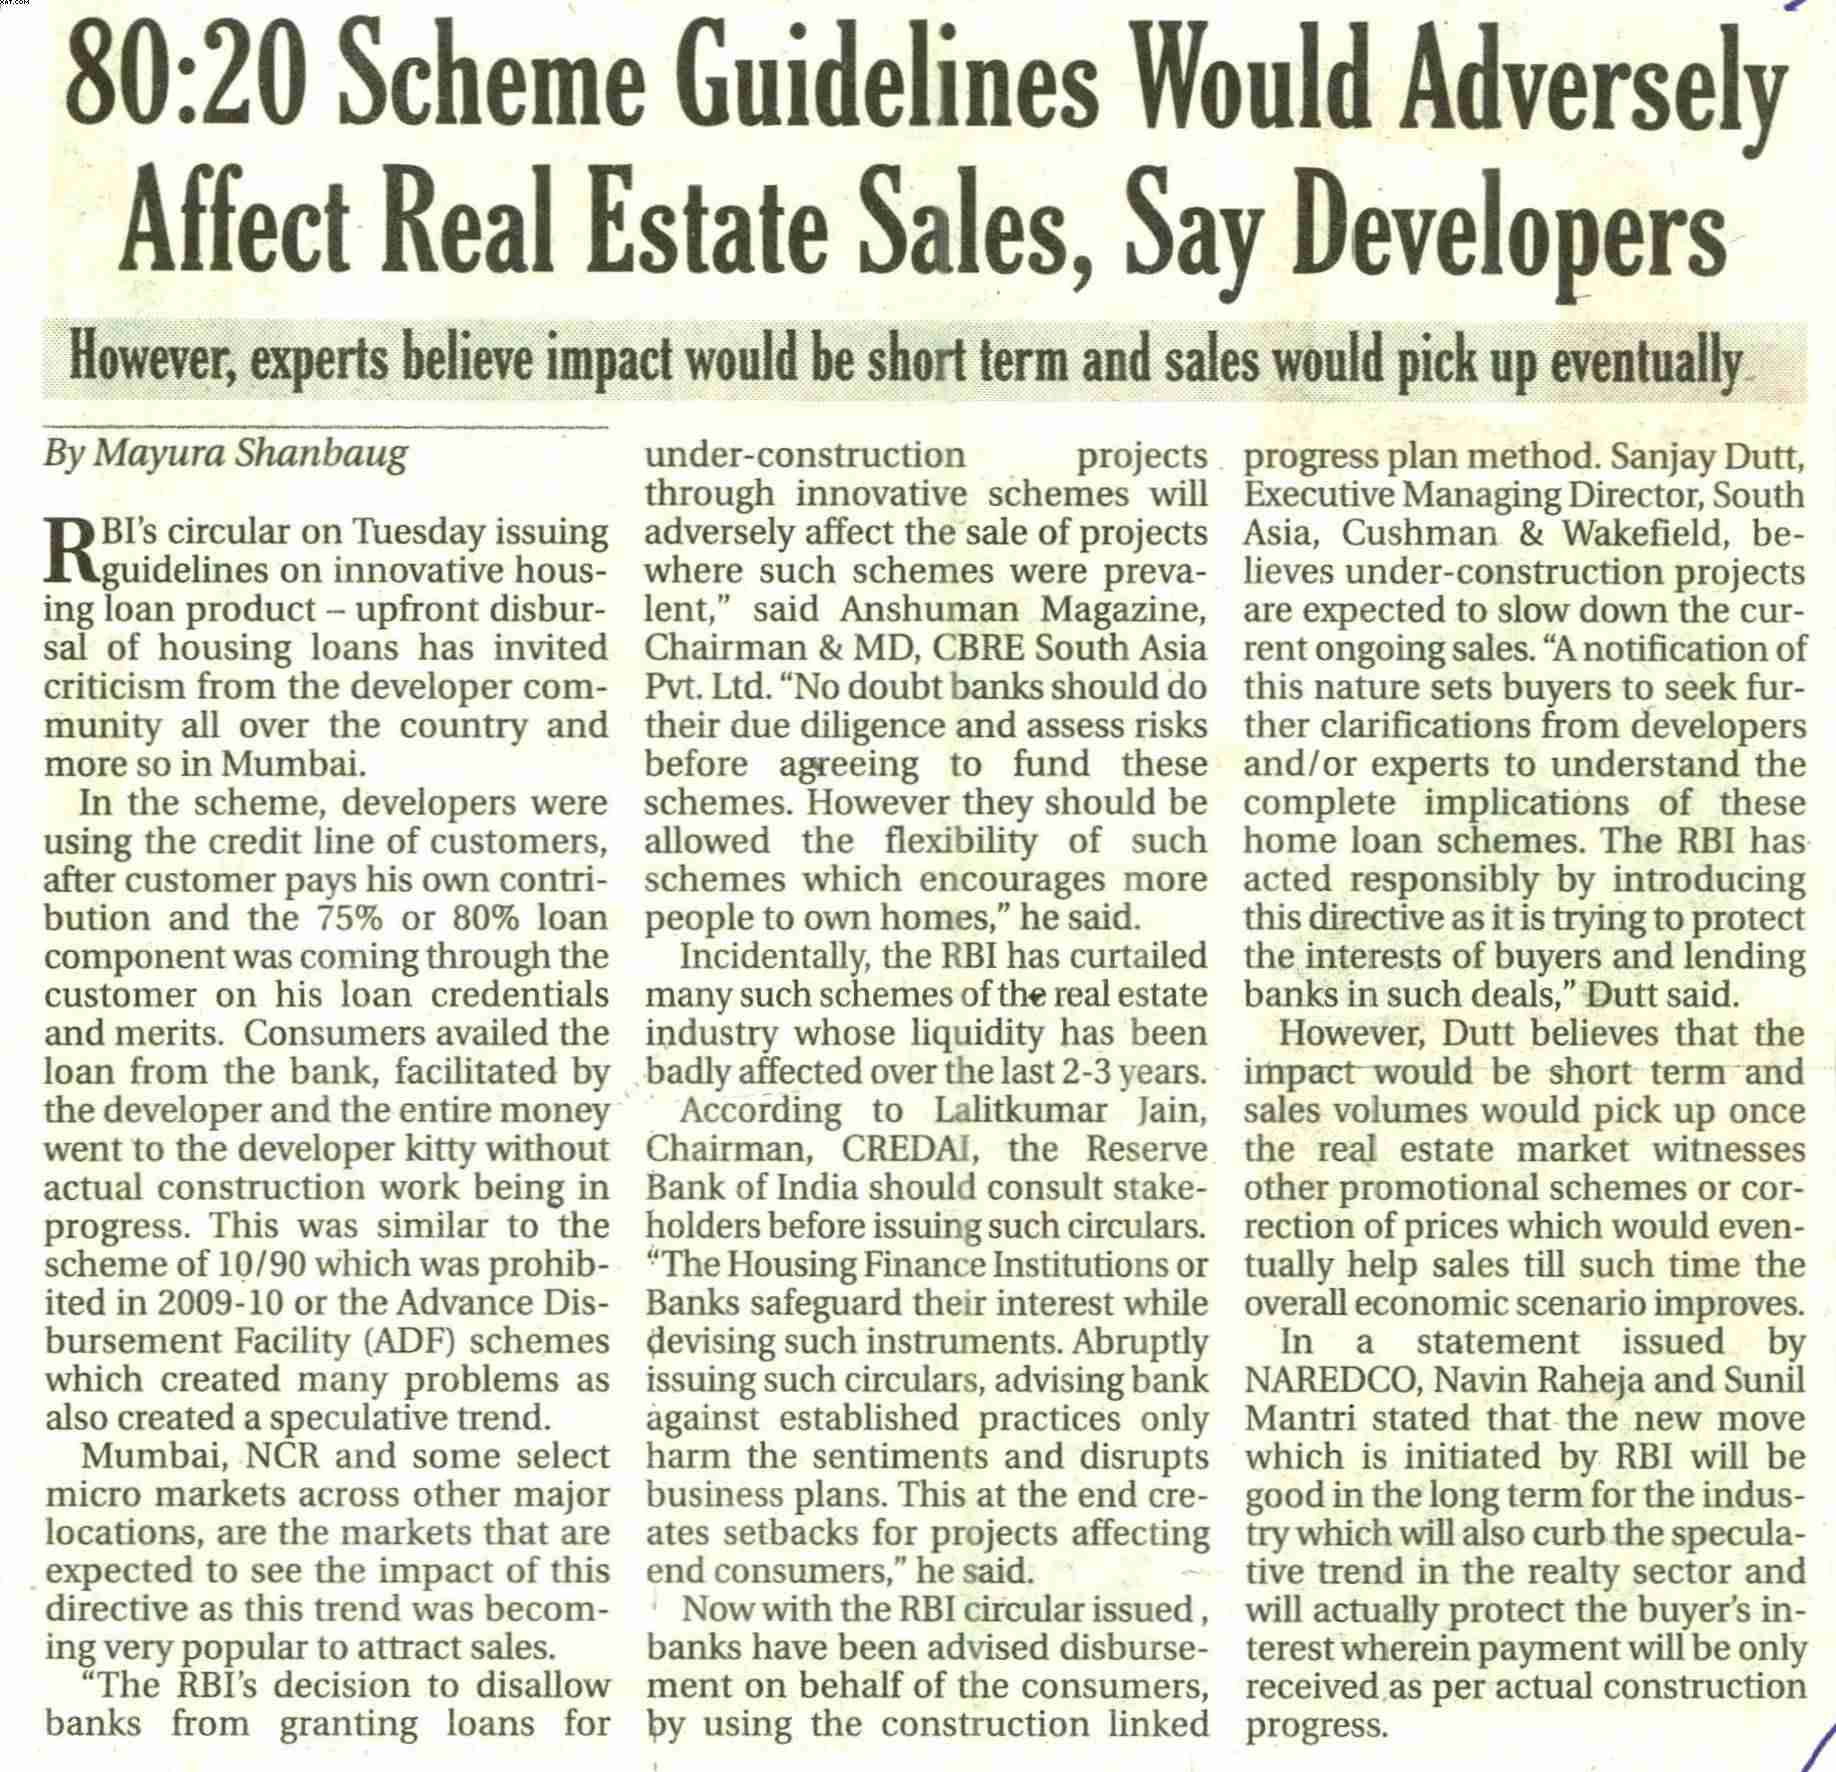 80:20 scheme guidelines would adversely affect real estate sales, say developers